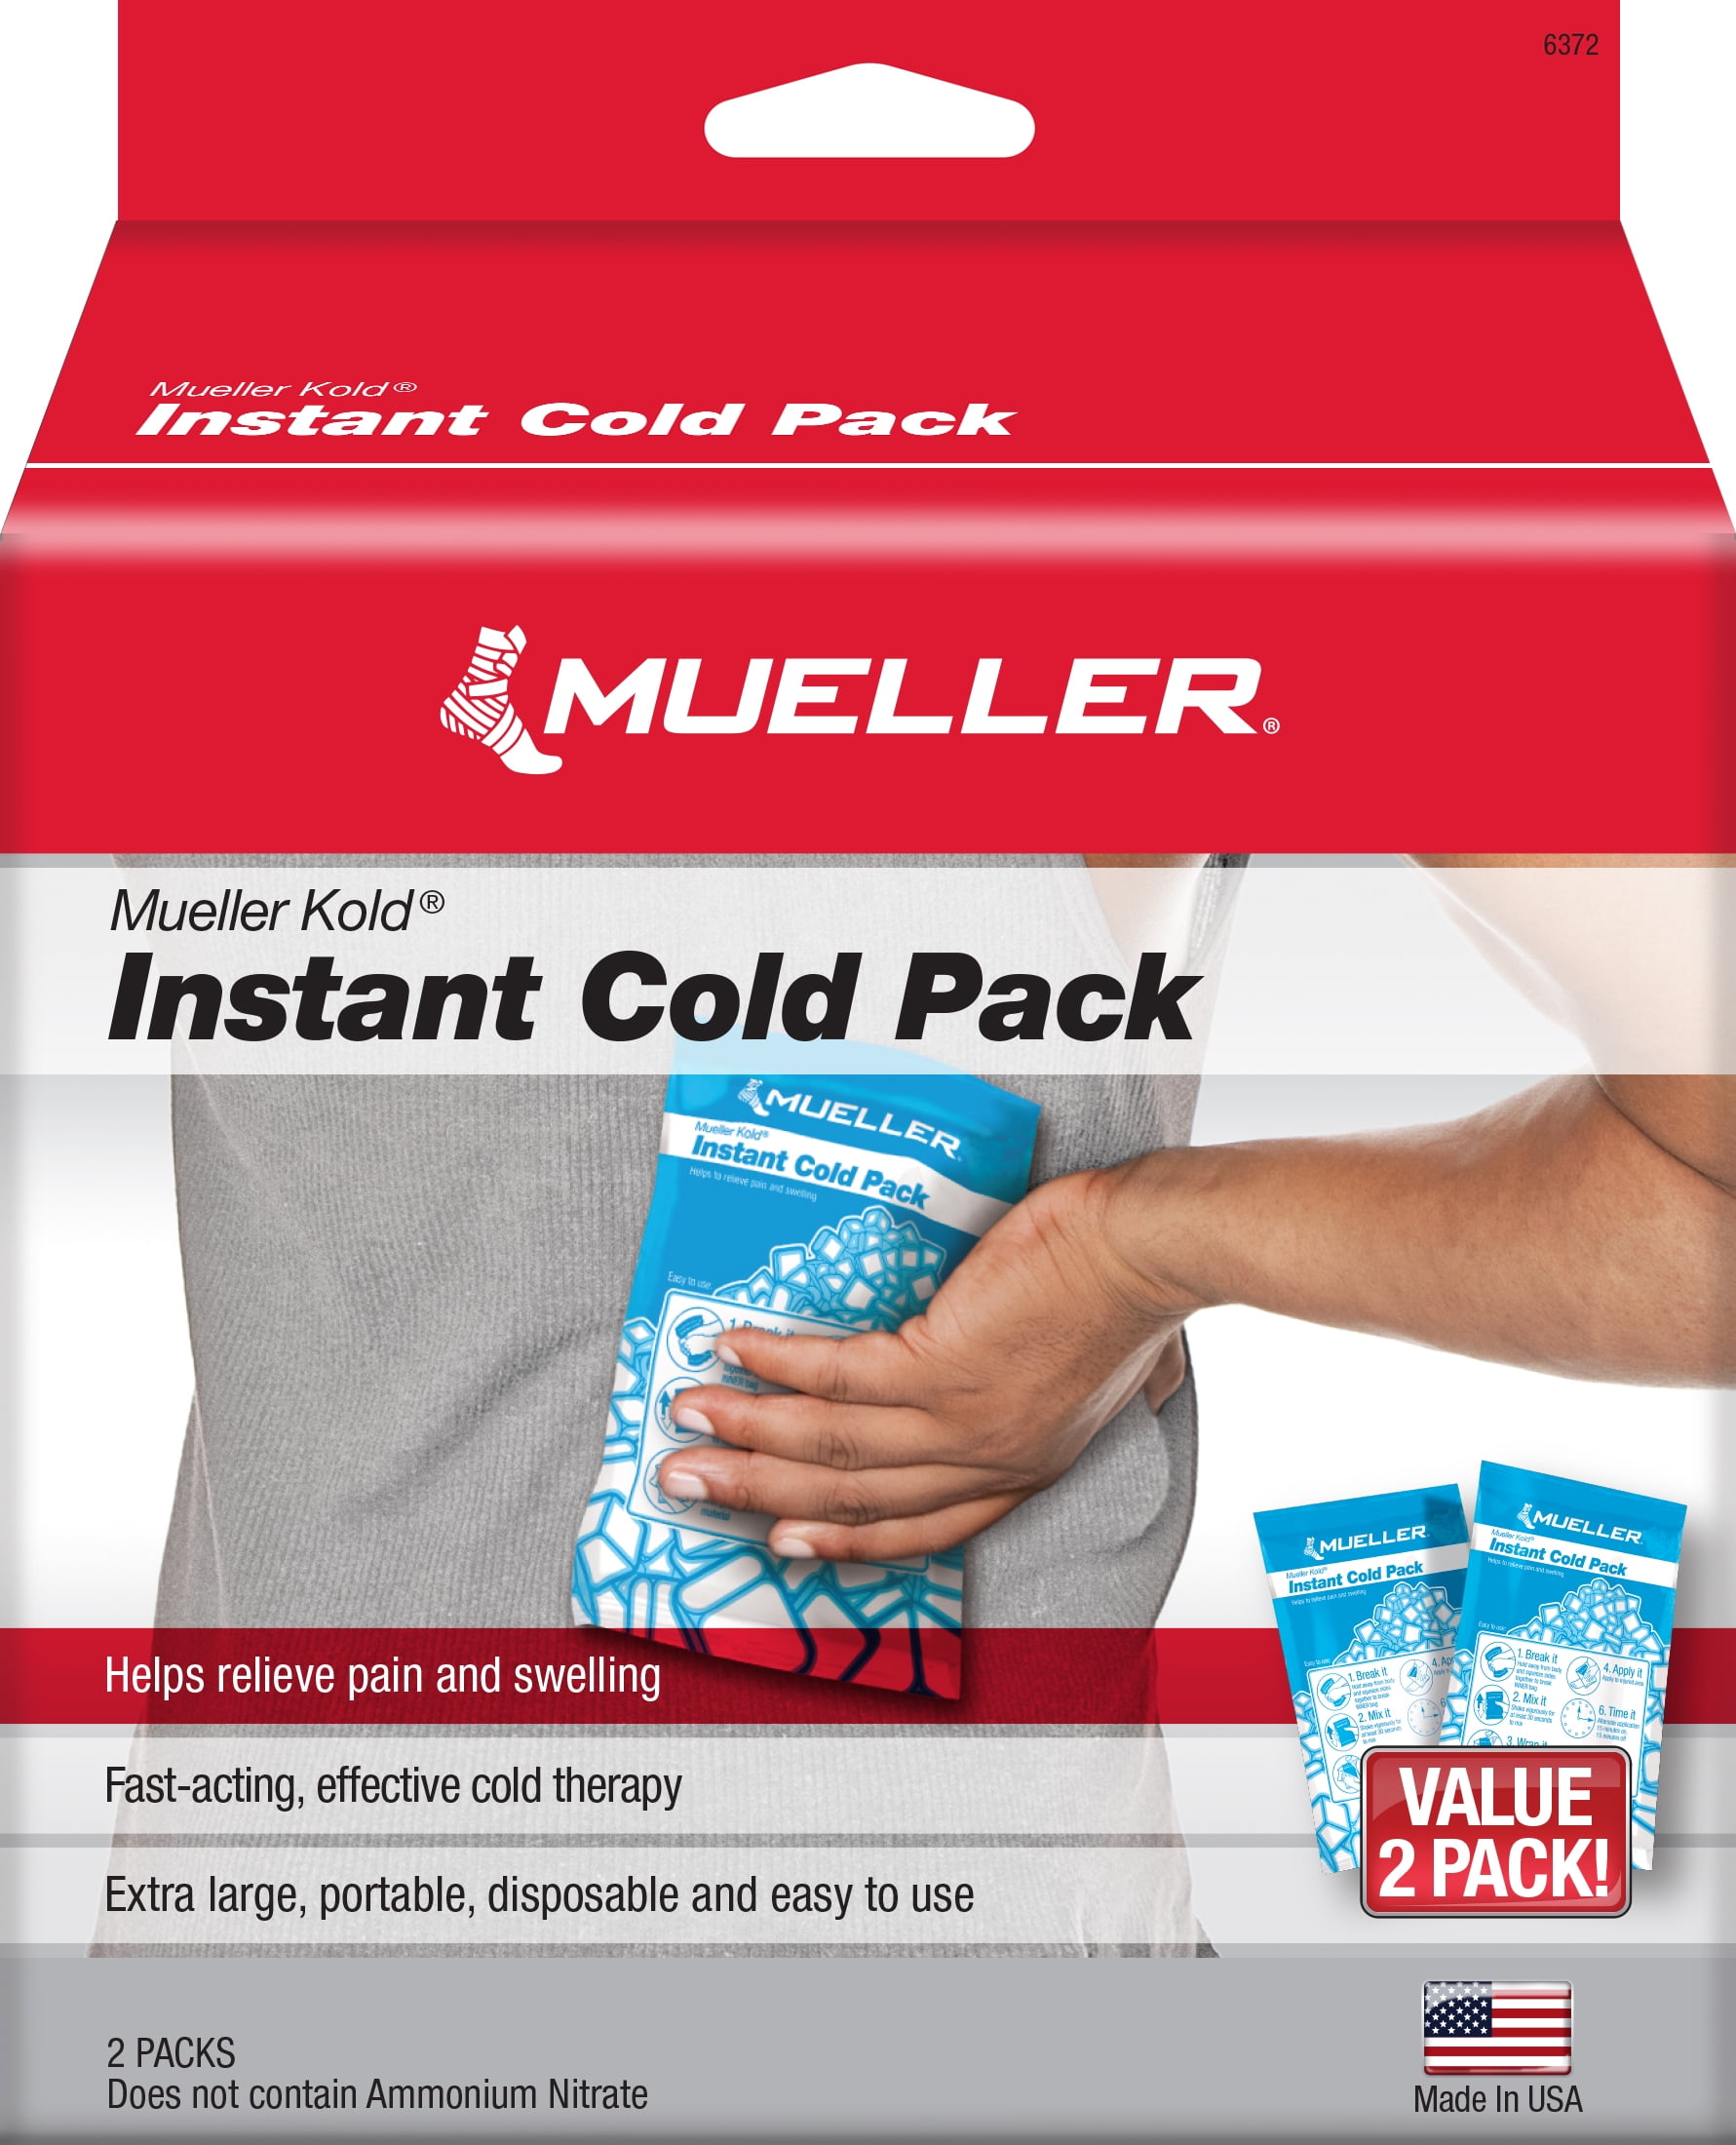 MUELLER KOLD INSTANT COLD PACK 6 X 9 #030102 SINGLE PACK 